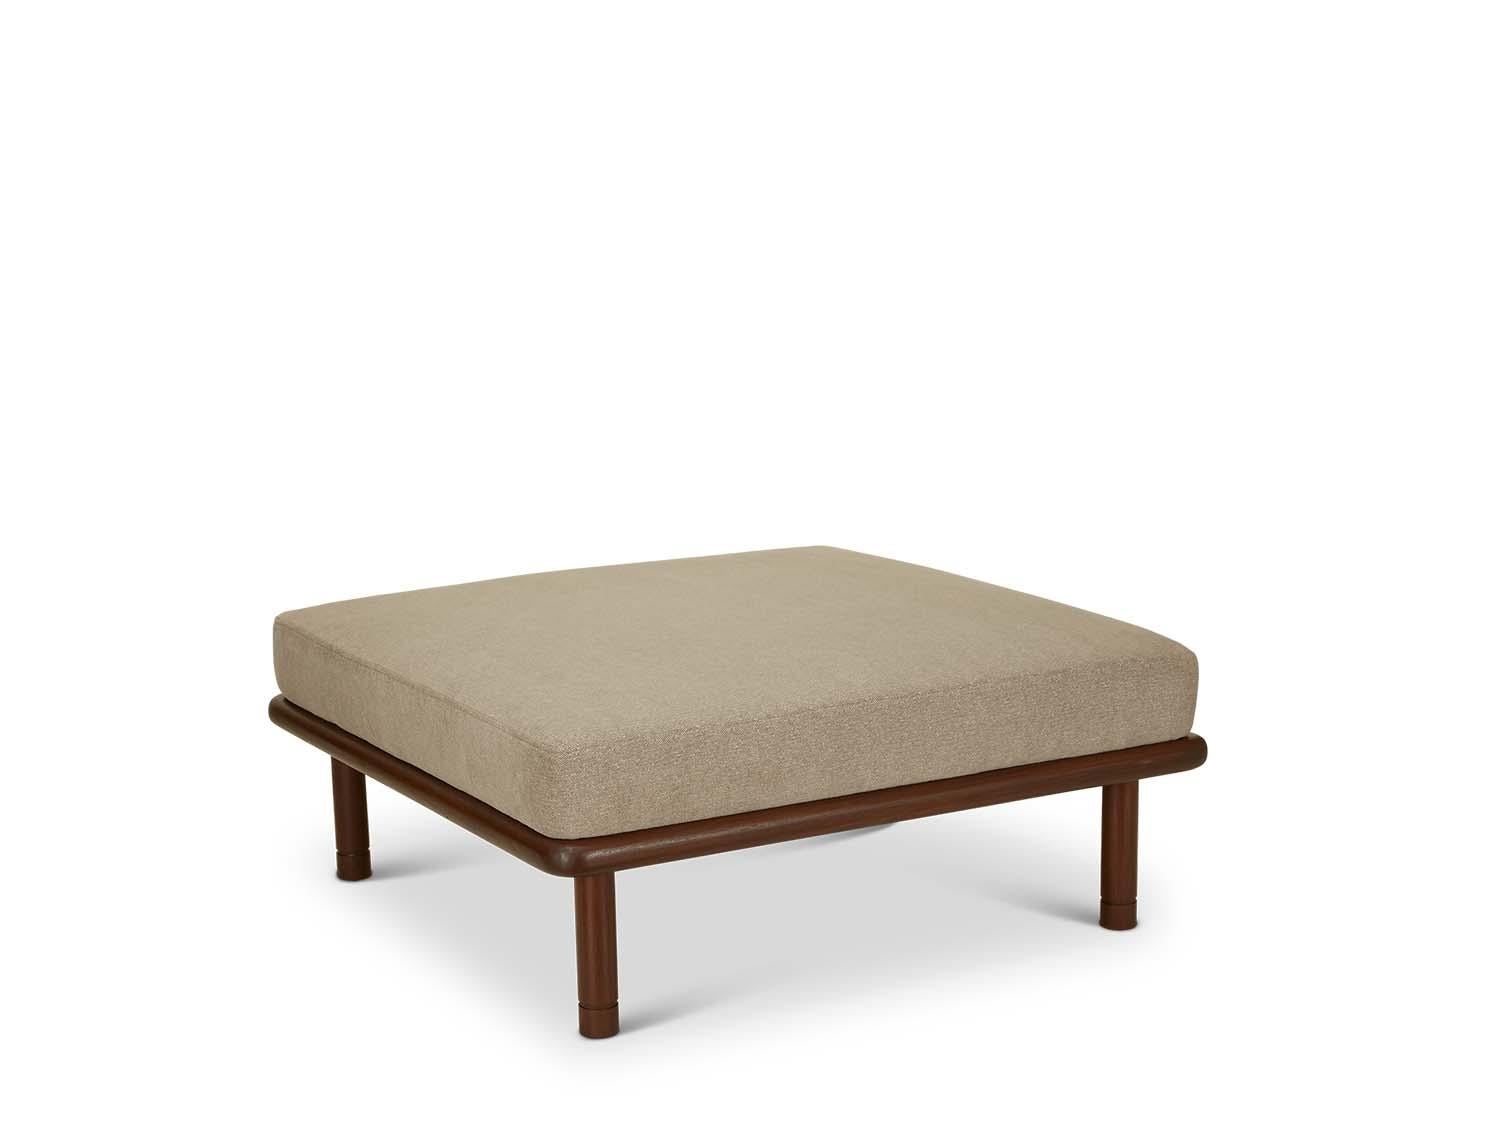 The Moreno ottoman square features a solid wood base with four cylindrical legs and an upholstered top. Available in American walnut or white oak.

The Lawson-Fenning Collection is designed and handmade in Los Angeles, California. Reach out to